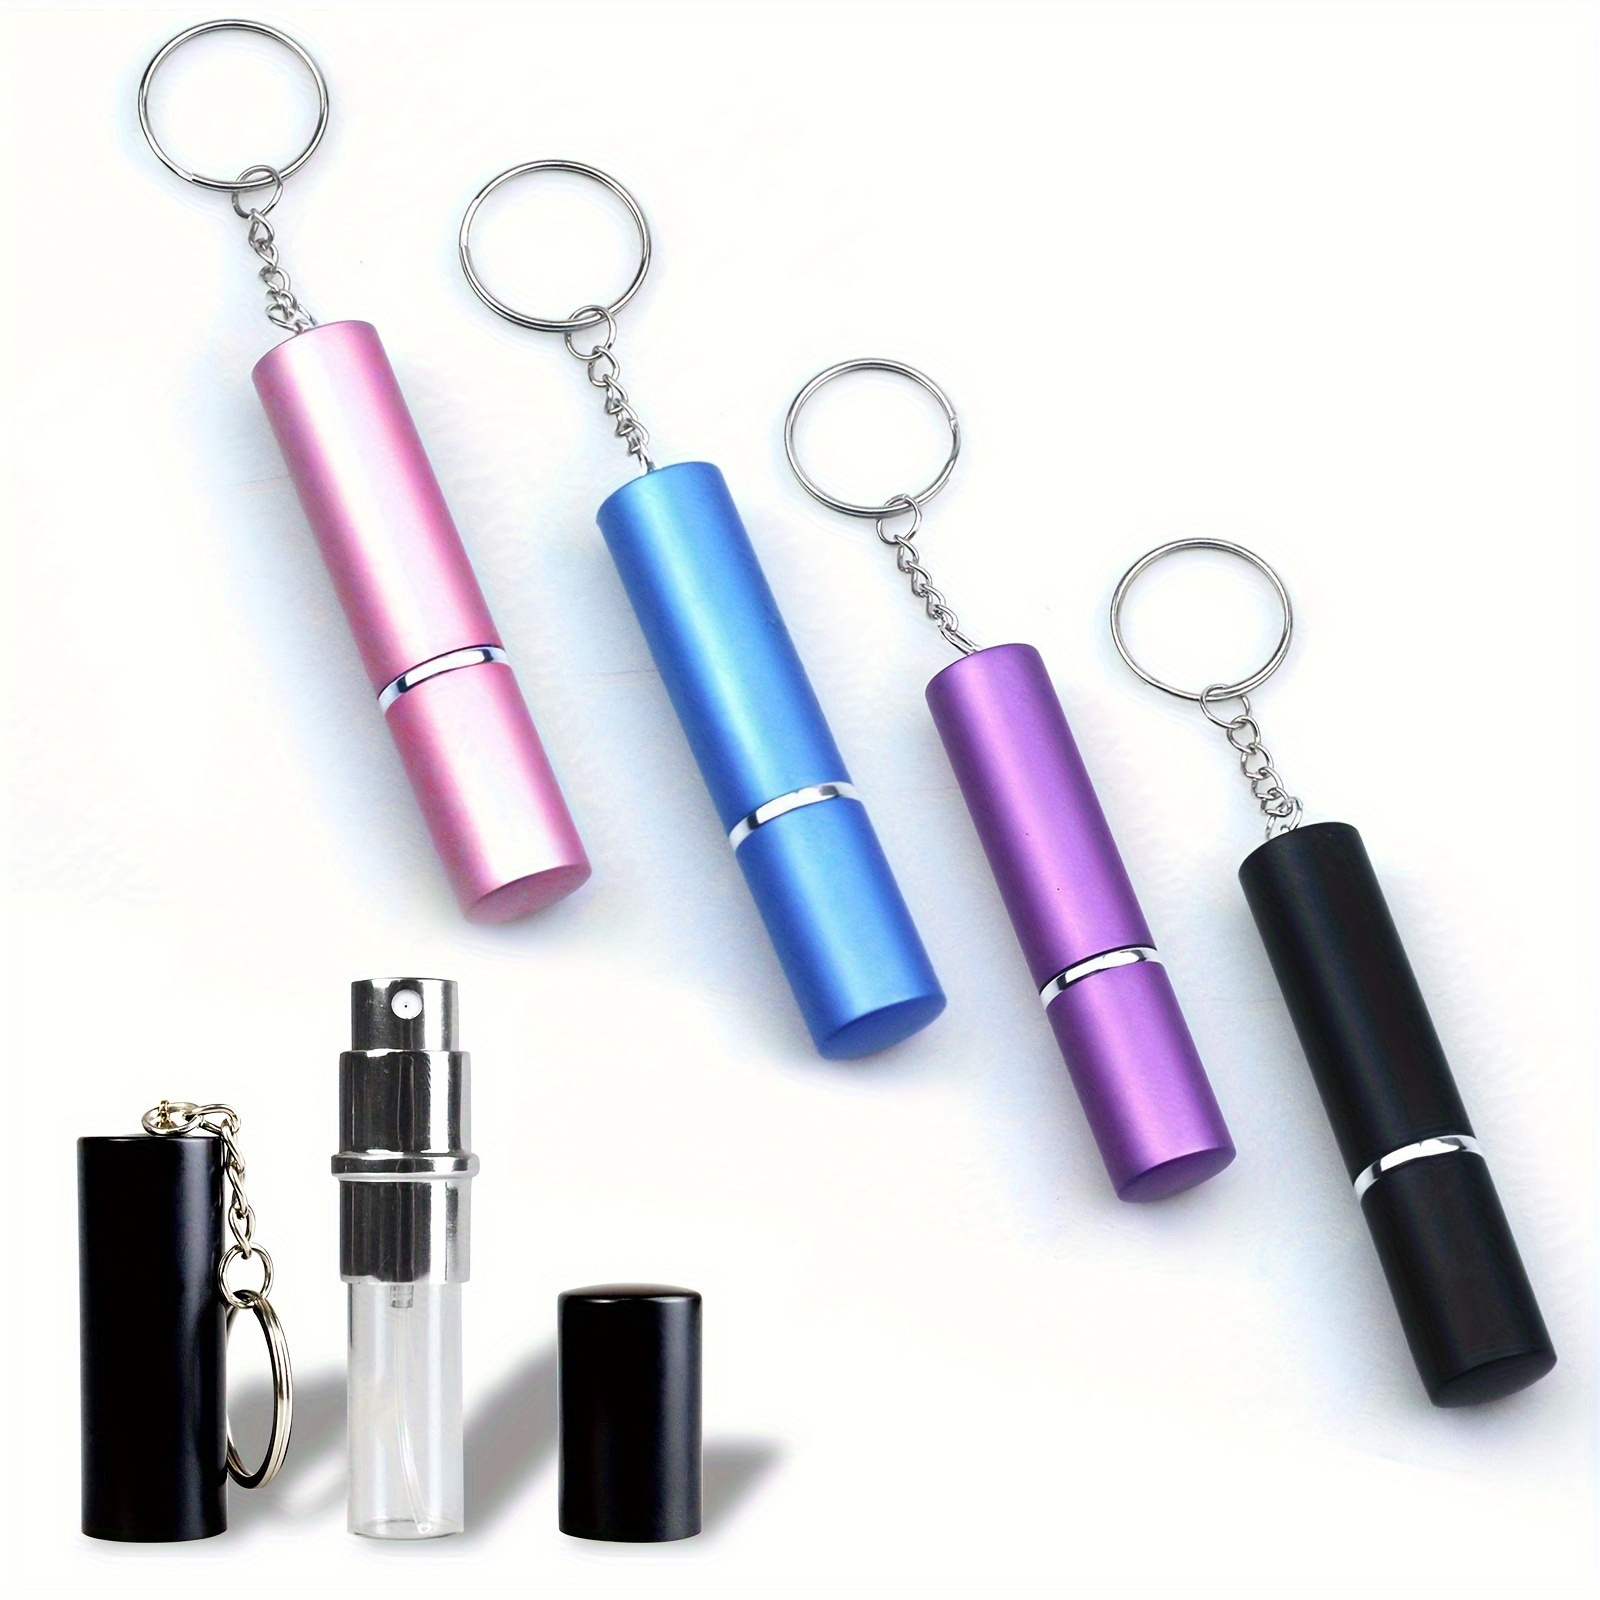 

Yiflin 1pc 10ml Portable Perfume Spray Bottle Keychain, Can Be Used As Pepper Spray Self Defense Keychain For Travel Gift For Women Daily Use